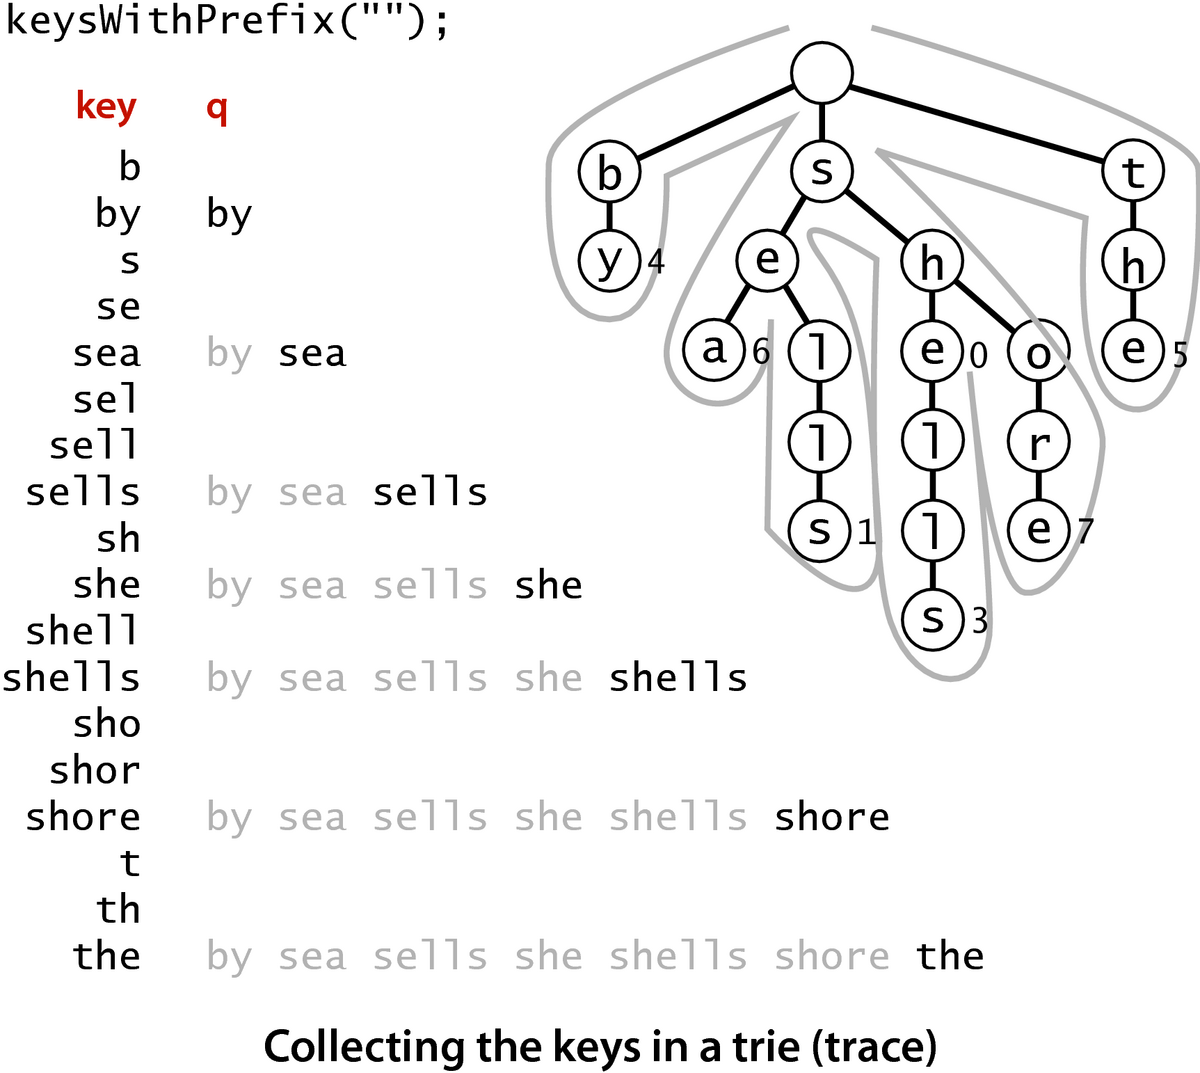 [Collecting the keys in a trie (trace)]